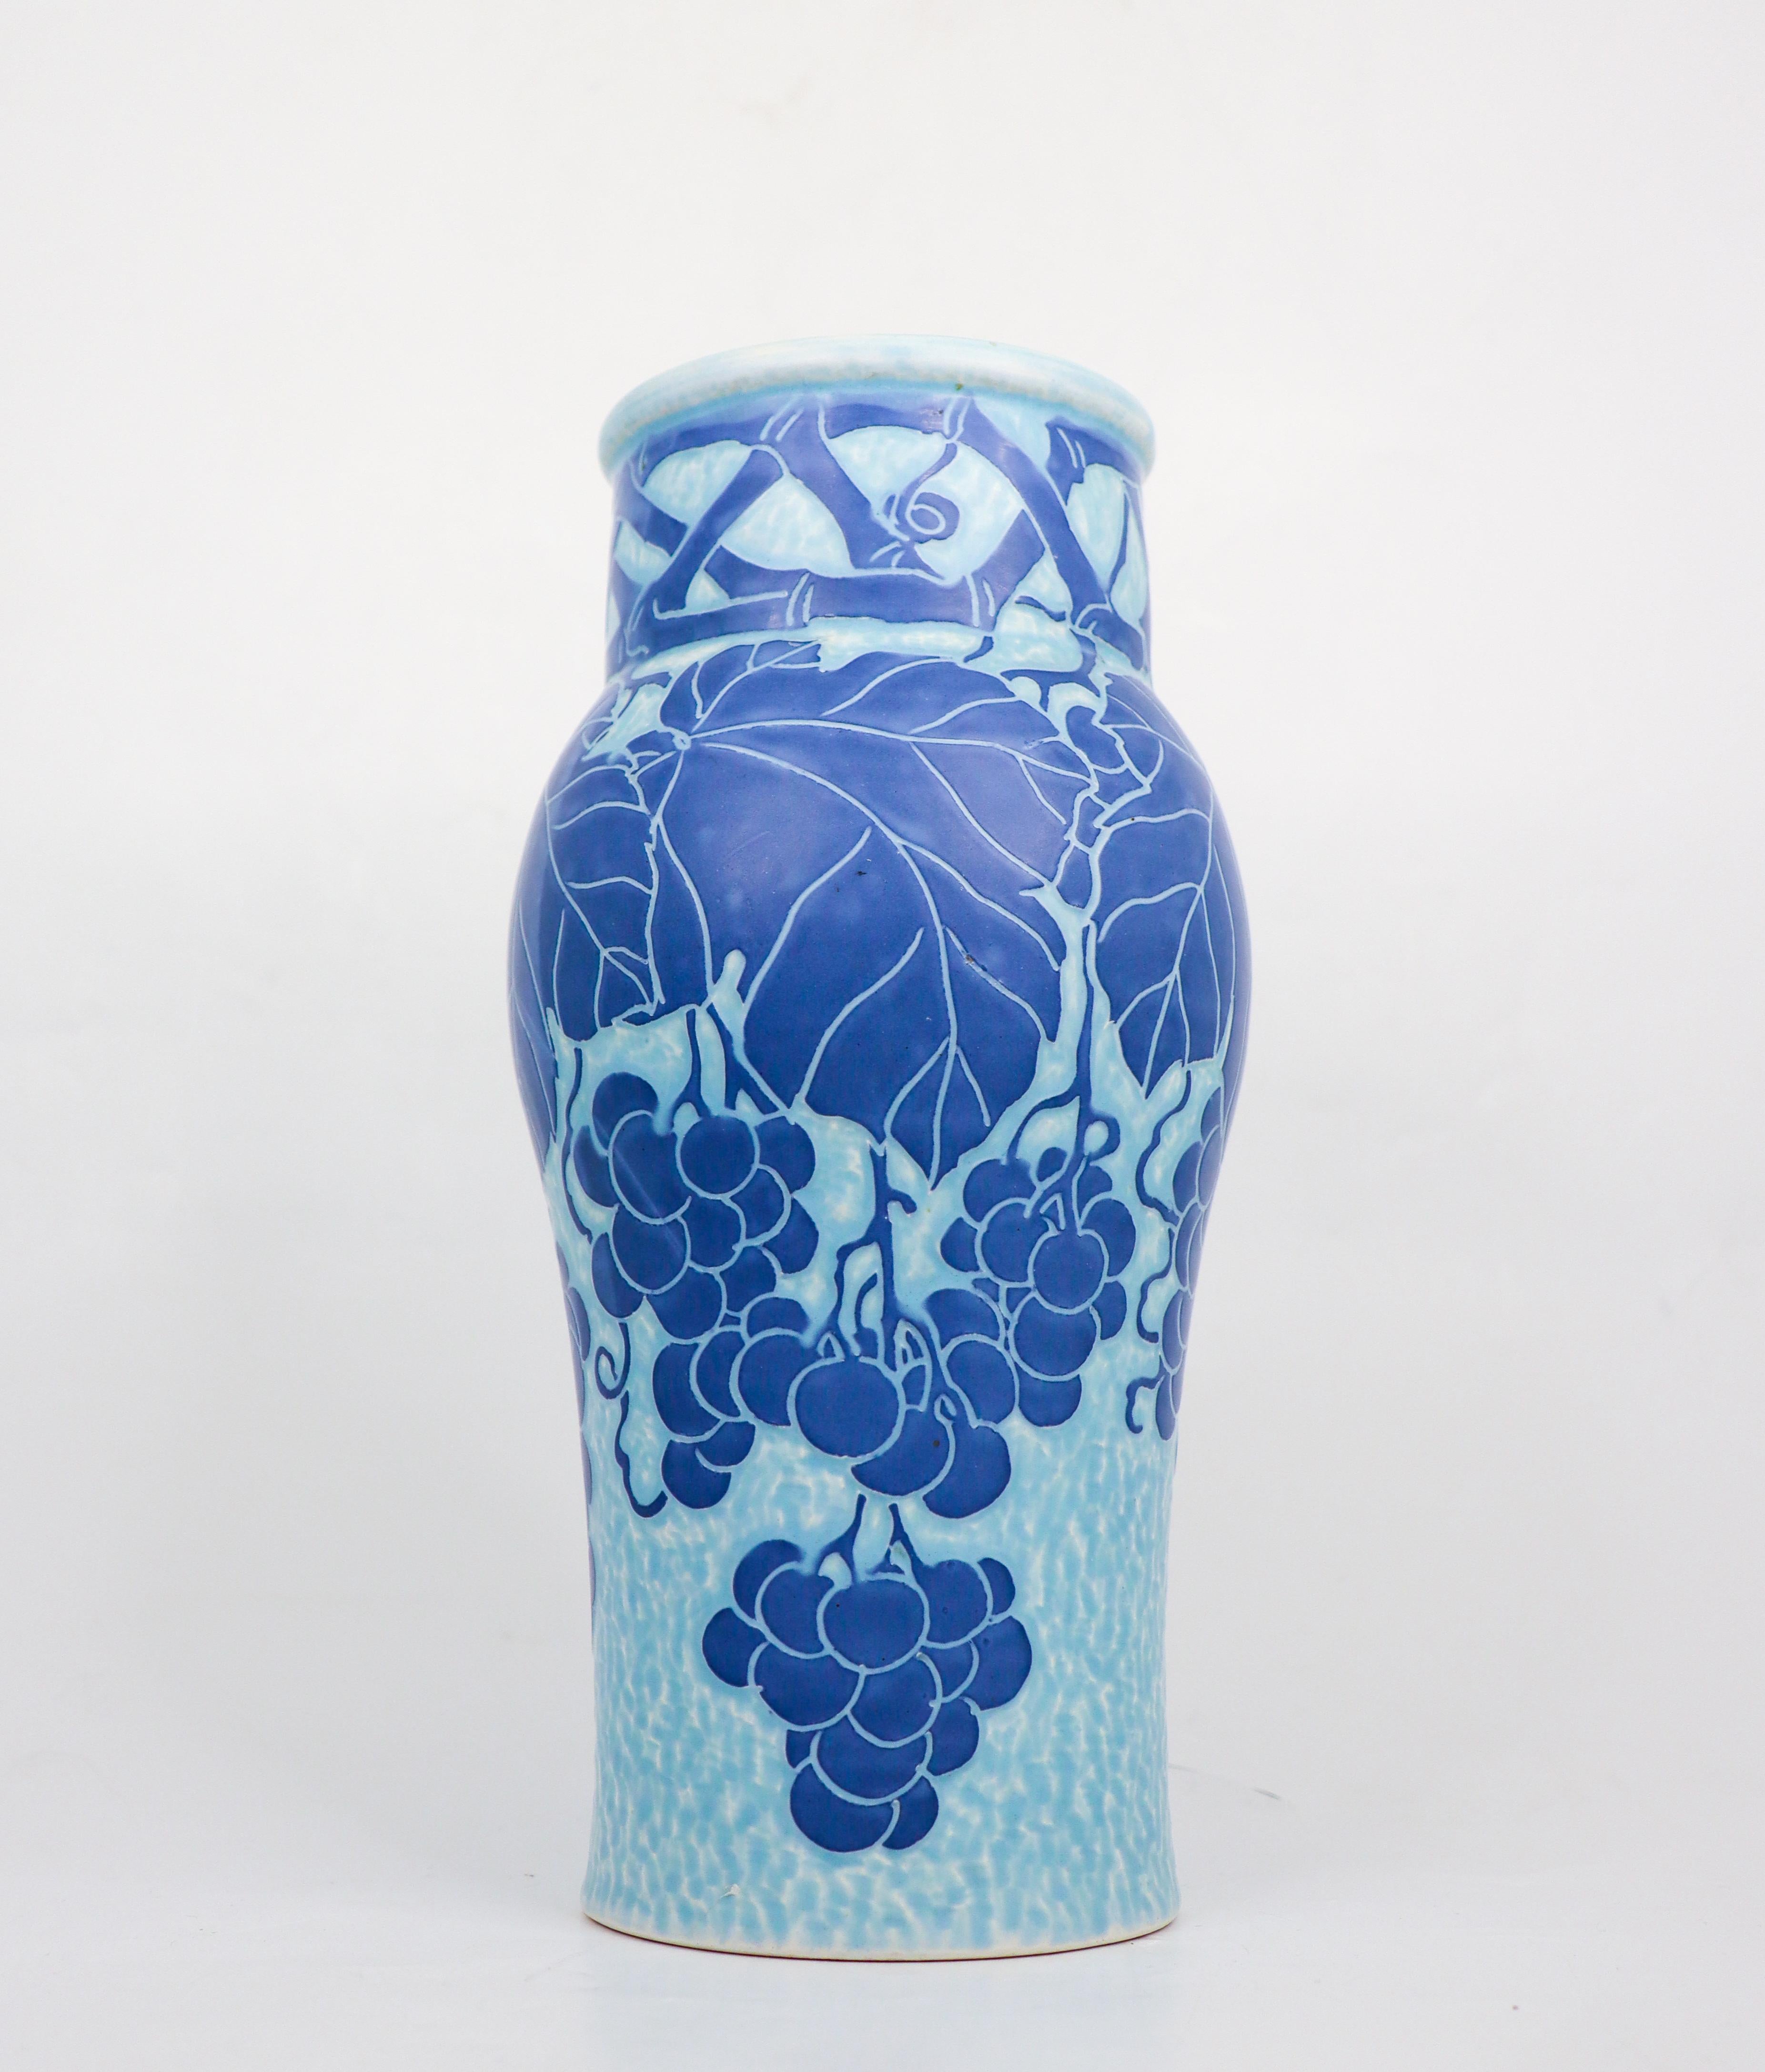 An art nouveau vase in ceramics designed by Josef Ekberg at Gustavsberg in 1915, this vase is from the classic Sgrafitto-serie. The vase is 28 cm (11.2